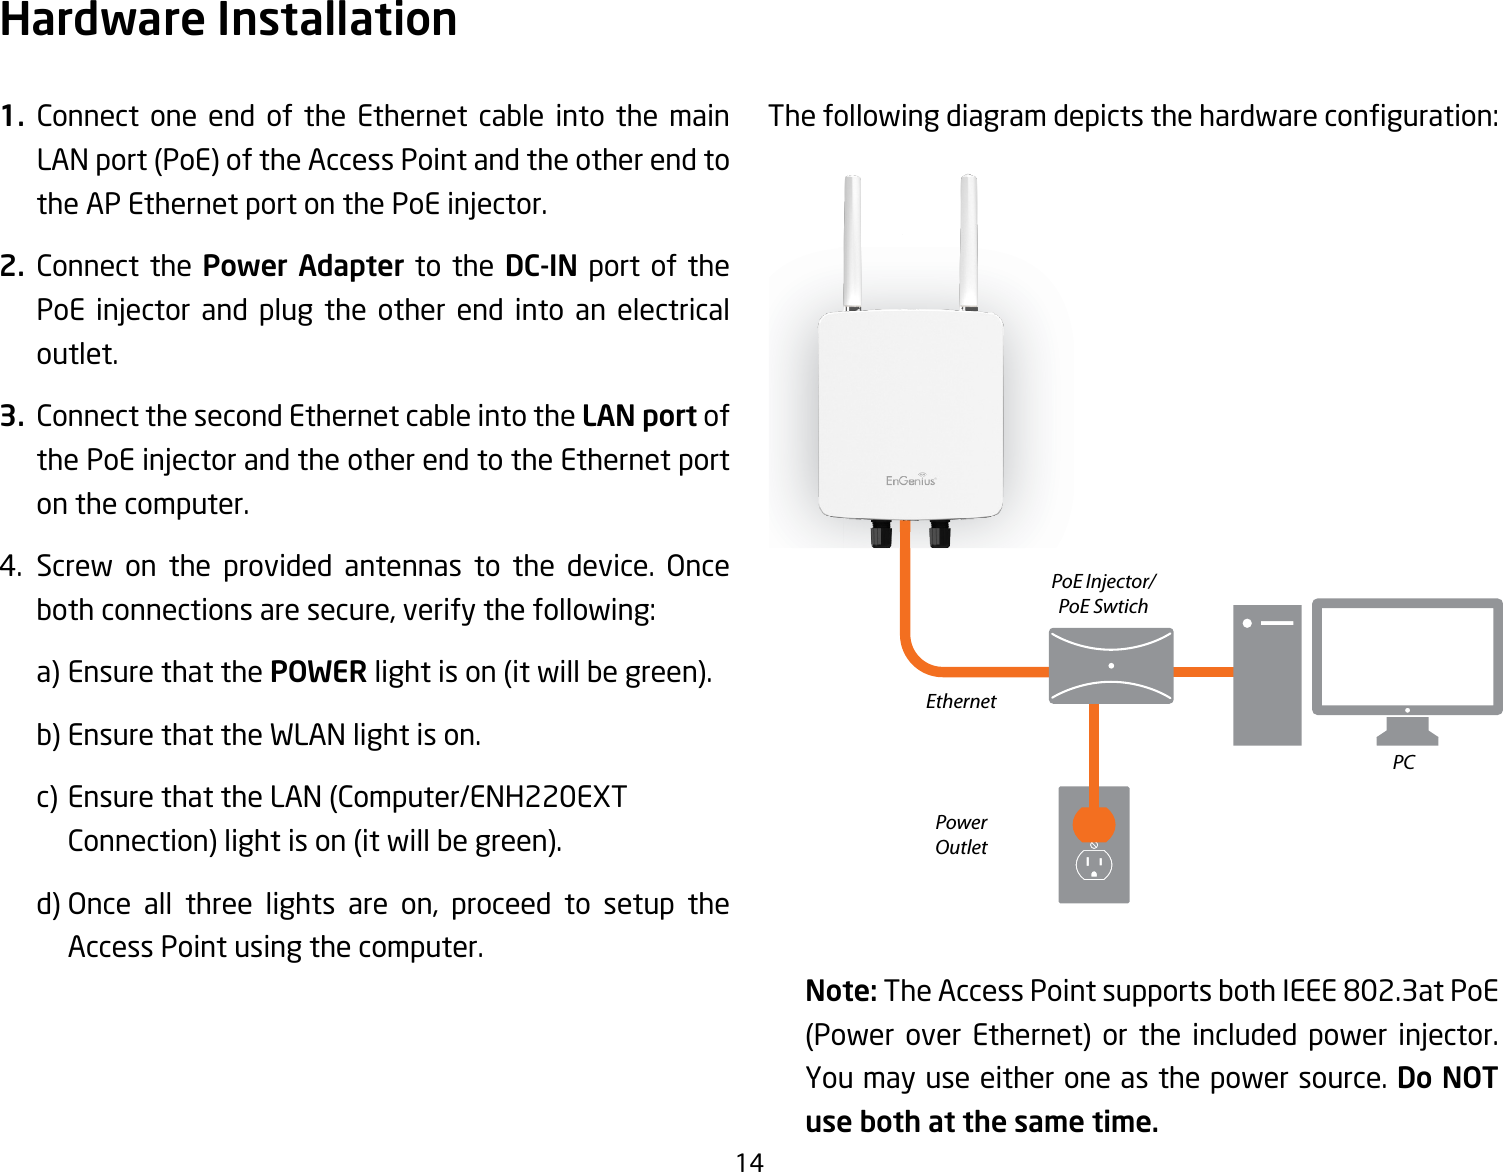 141. Connect one end of the Ethernet cable into the main LANport(PoE)oftheAccessPointandtheotherendtothe AP Ethernet port on the PoE injector.2. Connect the Power Adapter to the DC-IN port of the PoE injector and plug the other end into an electrical outlet.3.  Connect the second Ethernet cable into the LAN port of the PoE injector and the other end to the Ethernet port on the computer.4. Screw on the provided antennas to the device. Once both connections are secure, verify the following:    a) Ensure that the POWERlightison(itwillbegreen).    b) Ensure that the WLAN light is on.  c)EnsurethattheLAN(Computer/ENH220EXT  Connection)lightison(itwillbegreen).   d) Once all three lights are on, proceed to setup the    Access Point using the computer.Thefollowingdiagramdepictsthehardwareconguration:Note: The Access Point supports both IEEE 802.3at PoE (Power over Ethernet) or the included power injector.You may use either one as the power source. Do NOT use both at the same time.Hardware InstallationEthernetPCPowerOutletPoE Injector/PoE Swtich